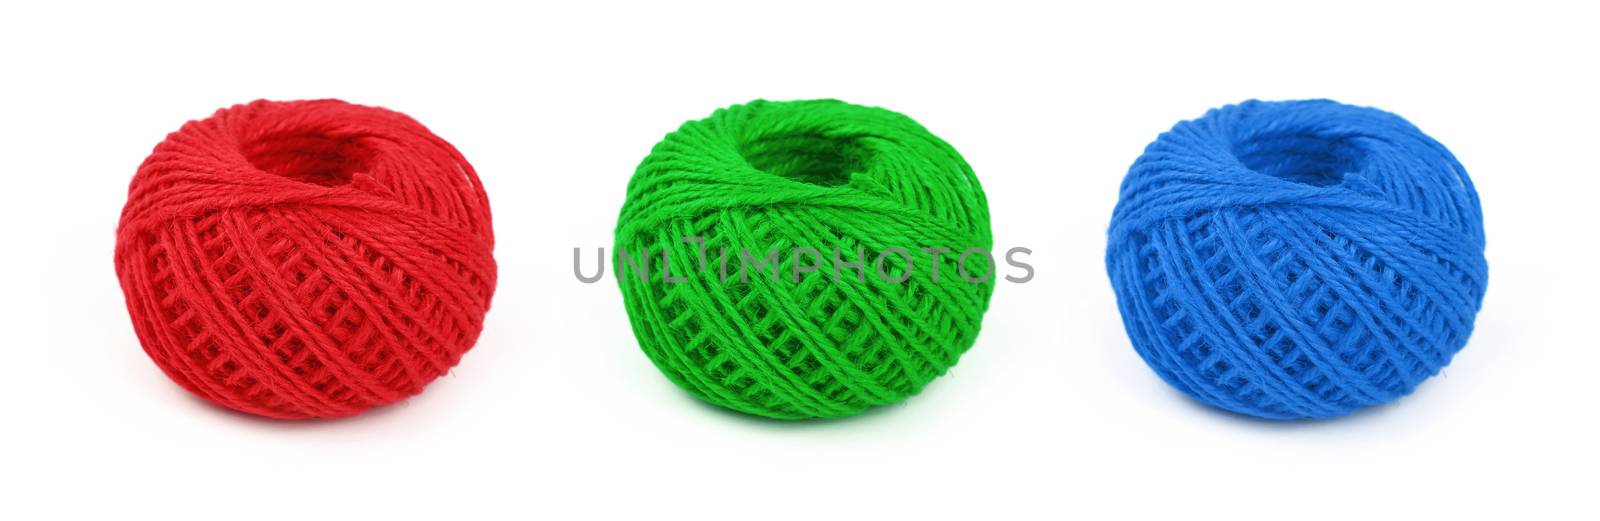 Three colorful multicolor small round coil bobbins of natural red, green and blue twine hessian burlap jute rope isolated on white background, close up, high angle view